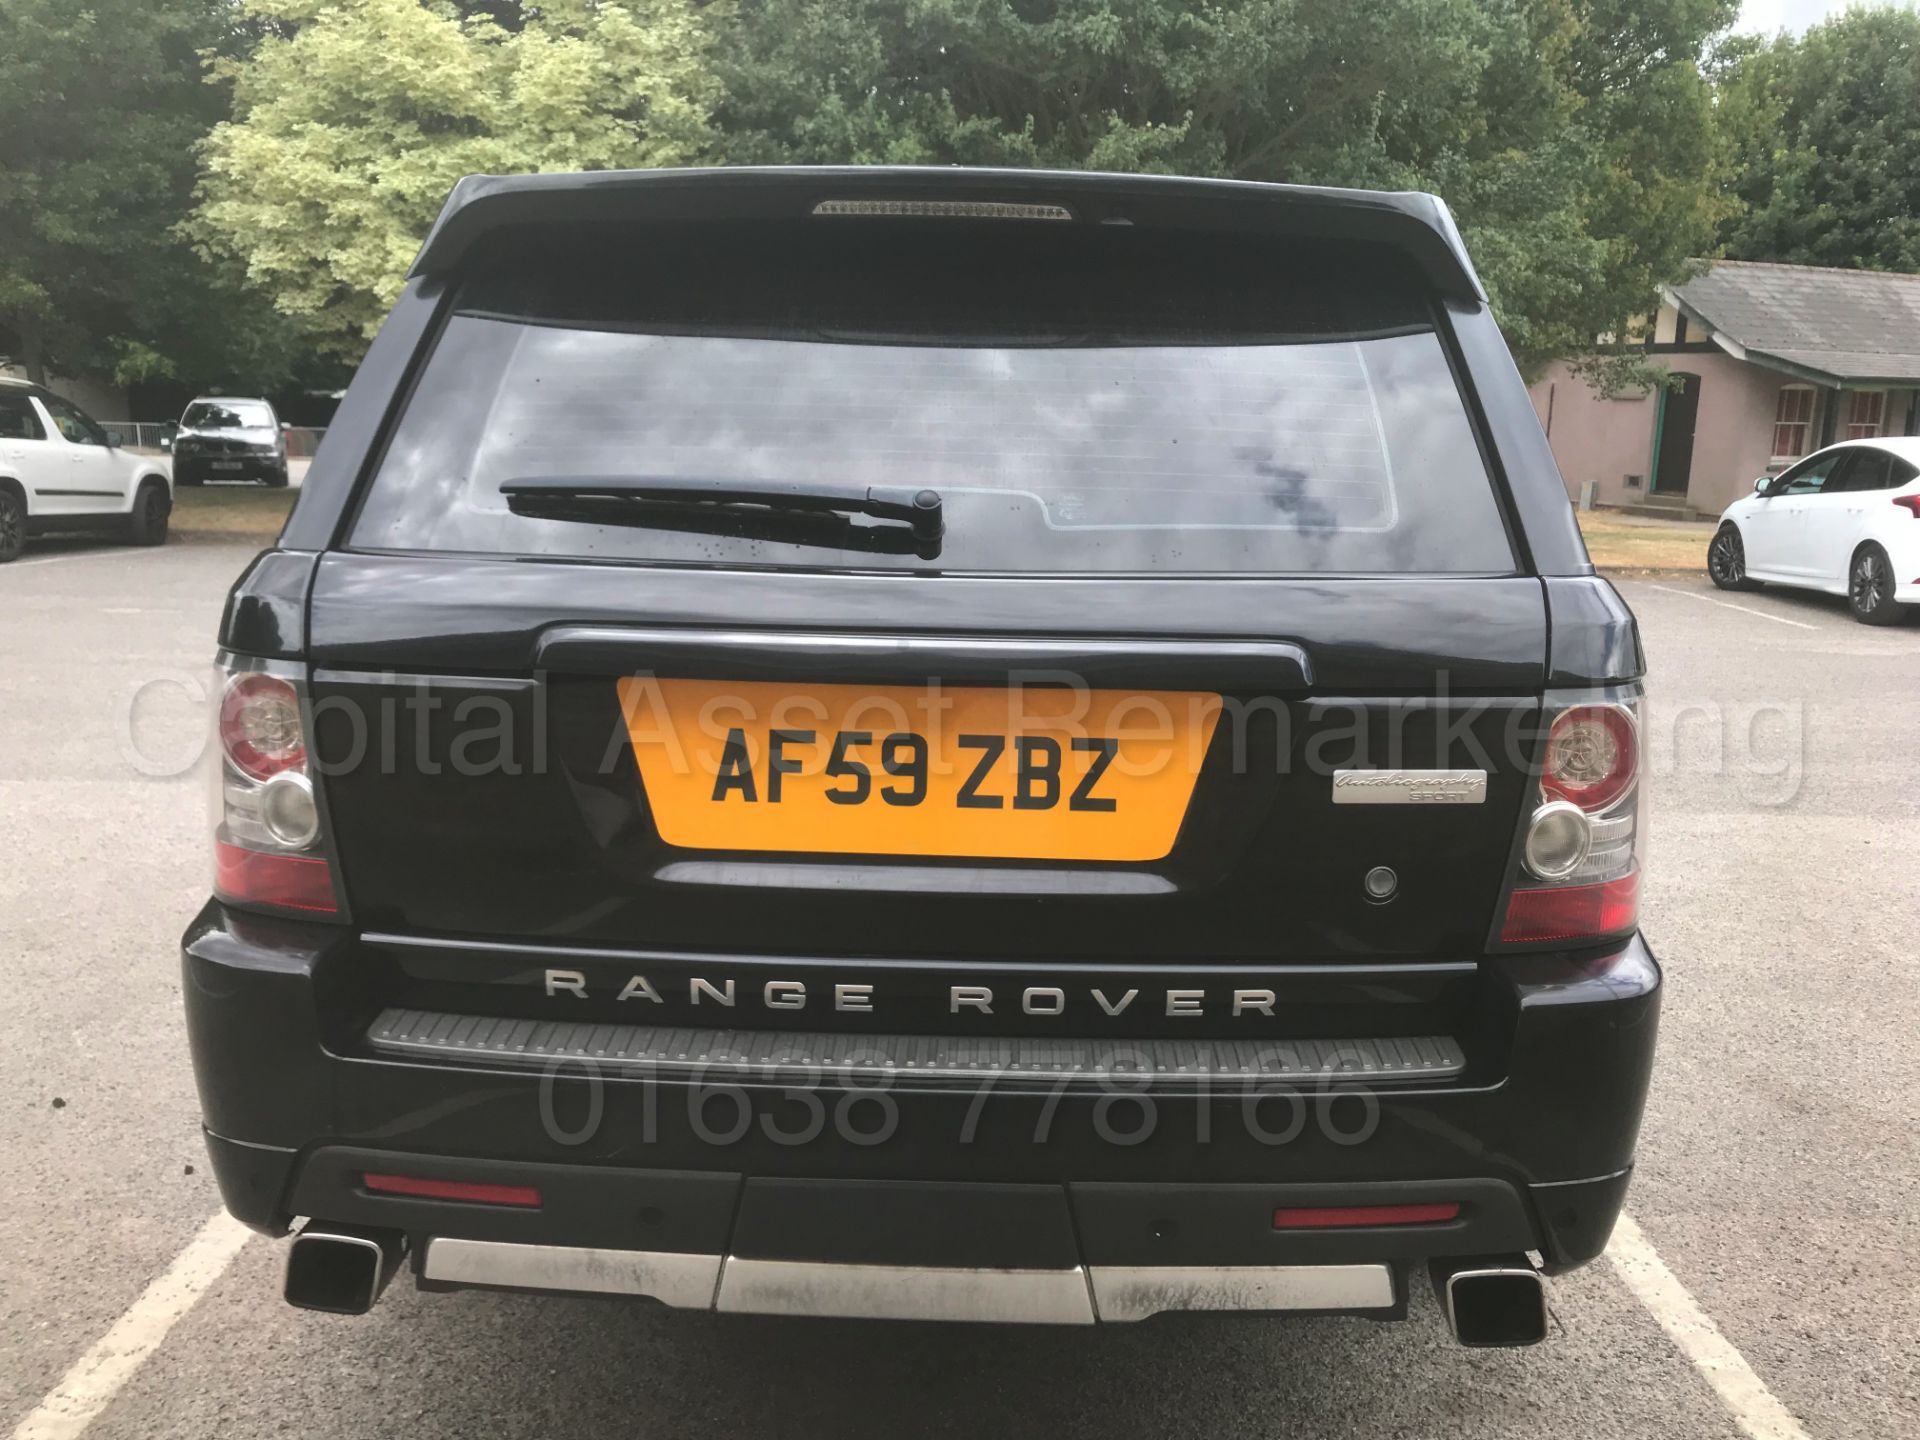 (On Sale) RANGE ROVER SPORT *HSE EDITION* (2010 MODEL) '3.0 TDV6 - 245 BHP - AUTO' **FULLY LOADED** - Image 9 of 44